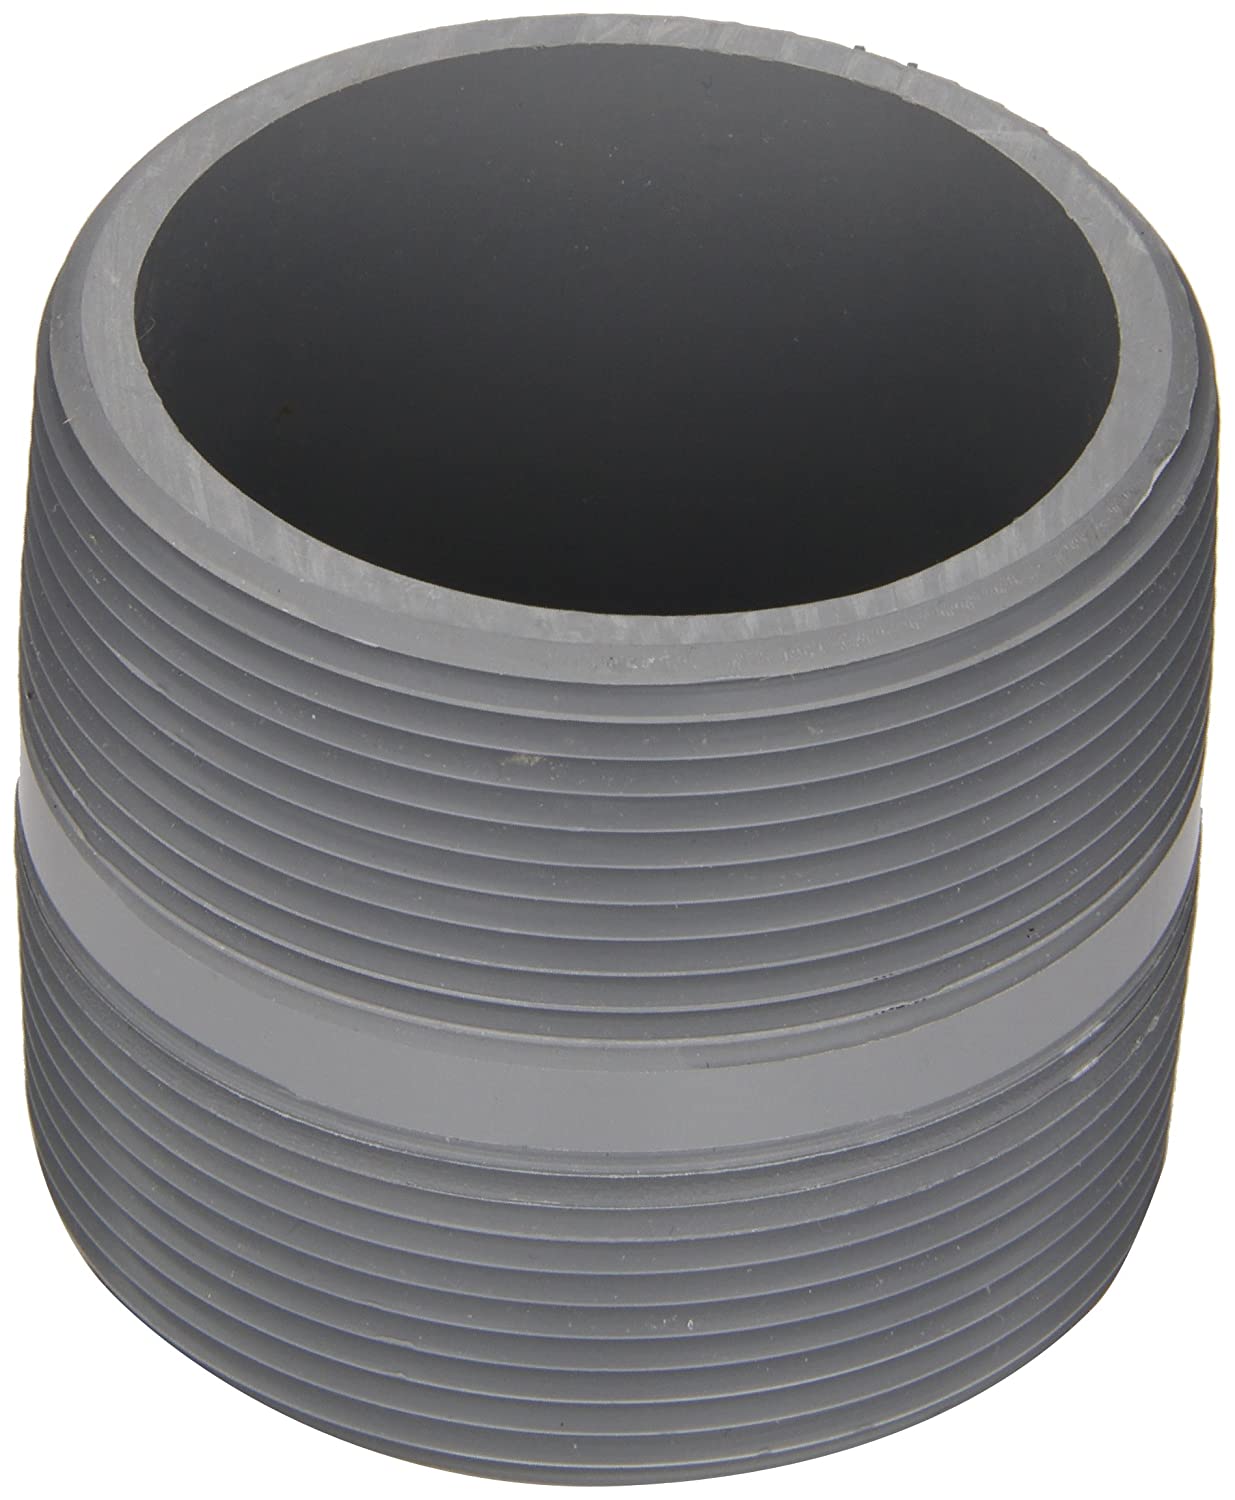 Spears 882-005C - CPVC Pipe Fitting, Close Nipple, Schedule 80, Gray, 1/2" NPT Male, 1-1/8" Length